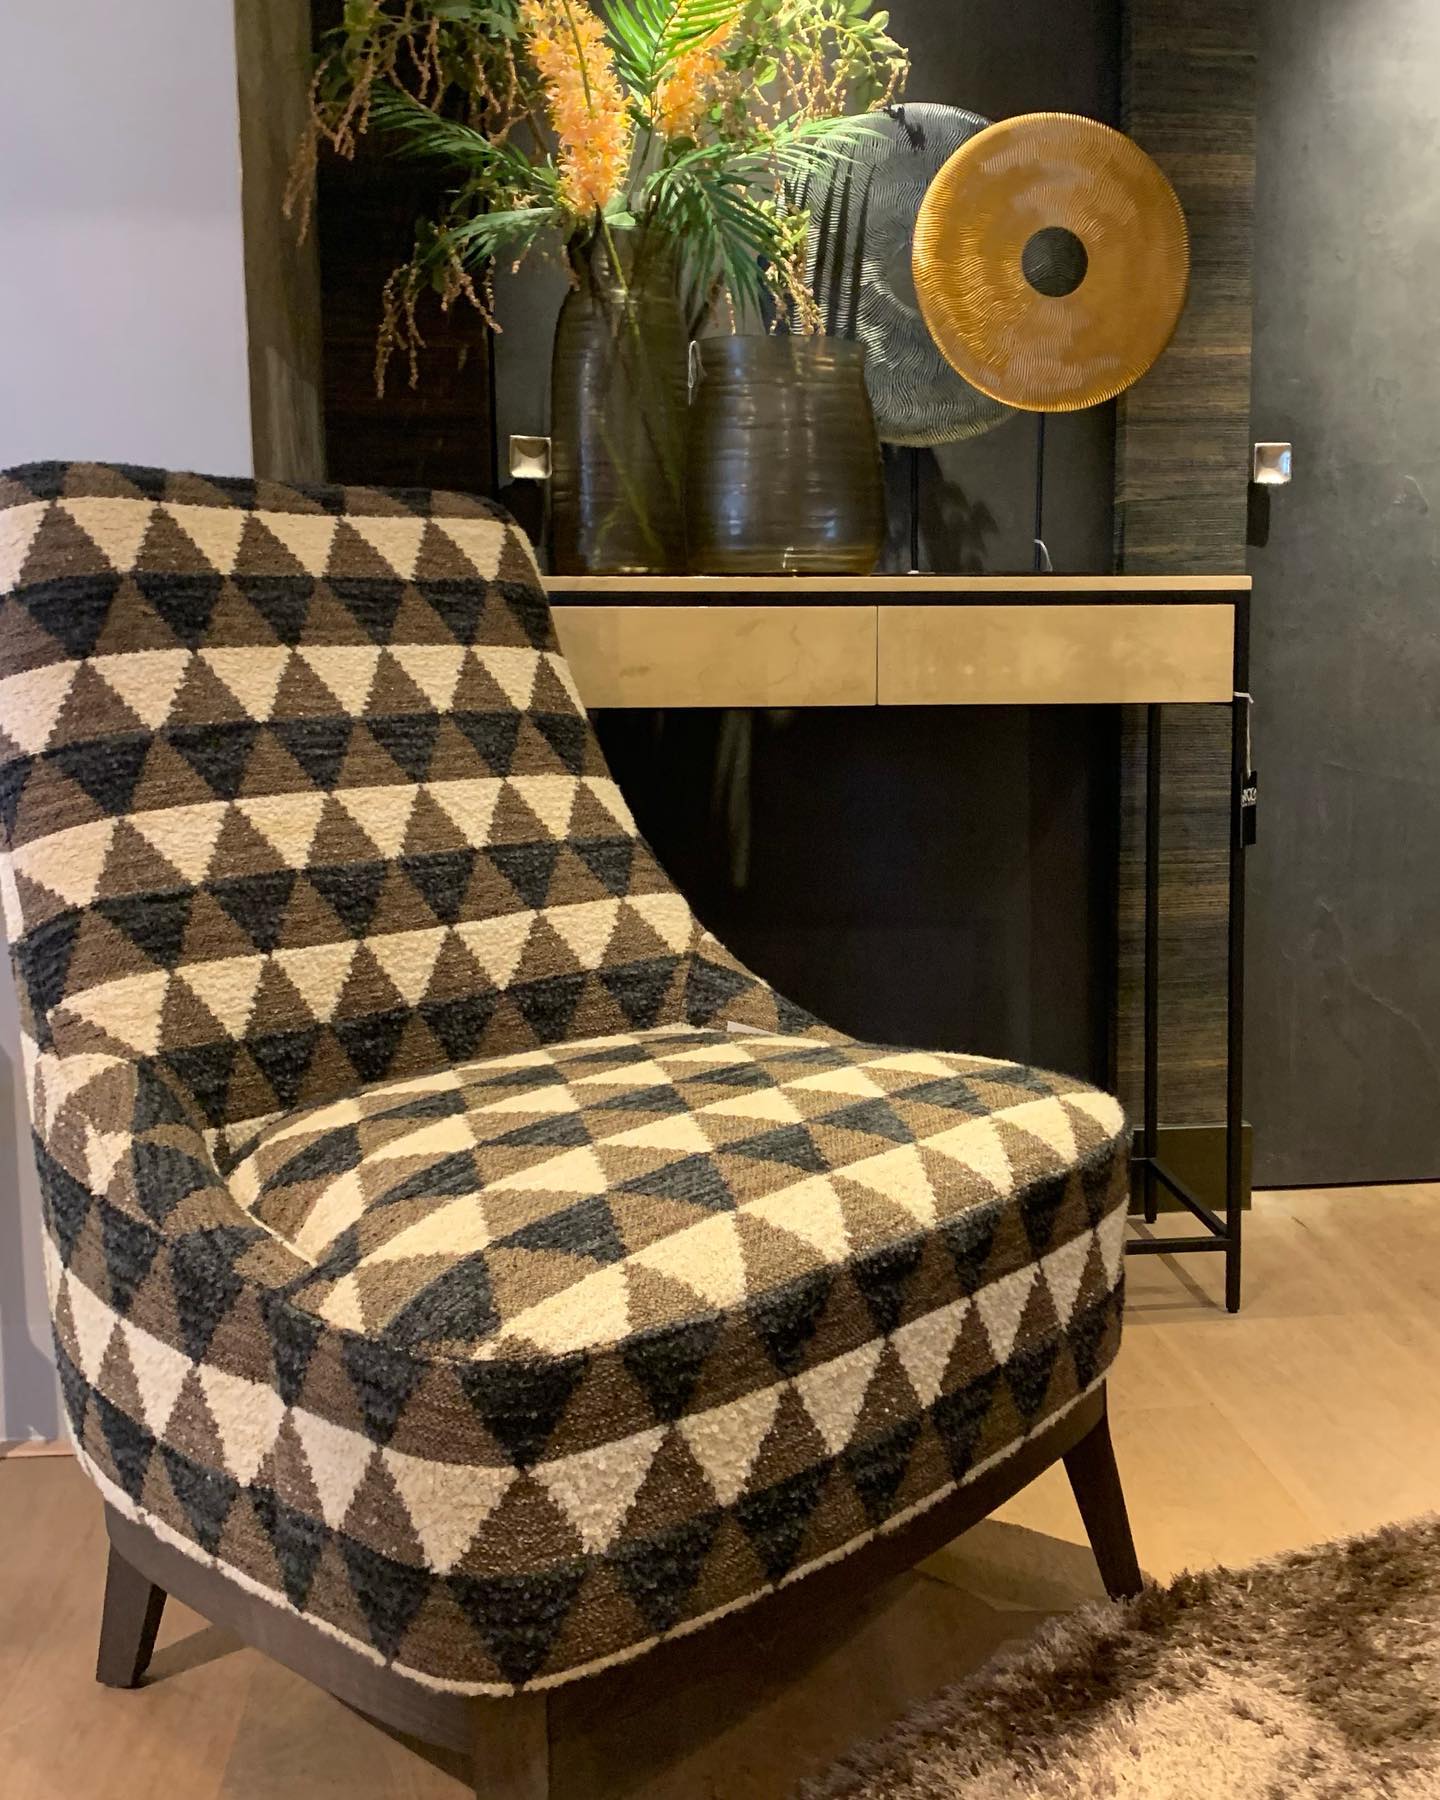 Now in our showroom new collection
#newcollection#chair#pattern#interiordesign#marthadegrootinterieur#playfull